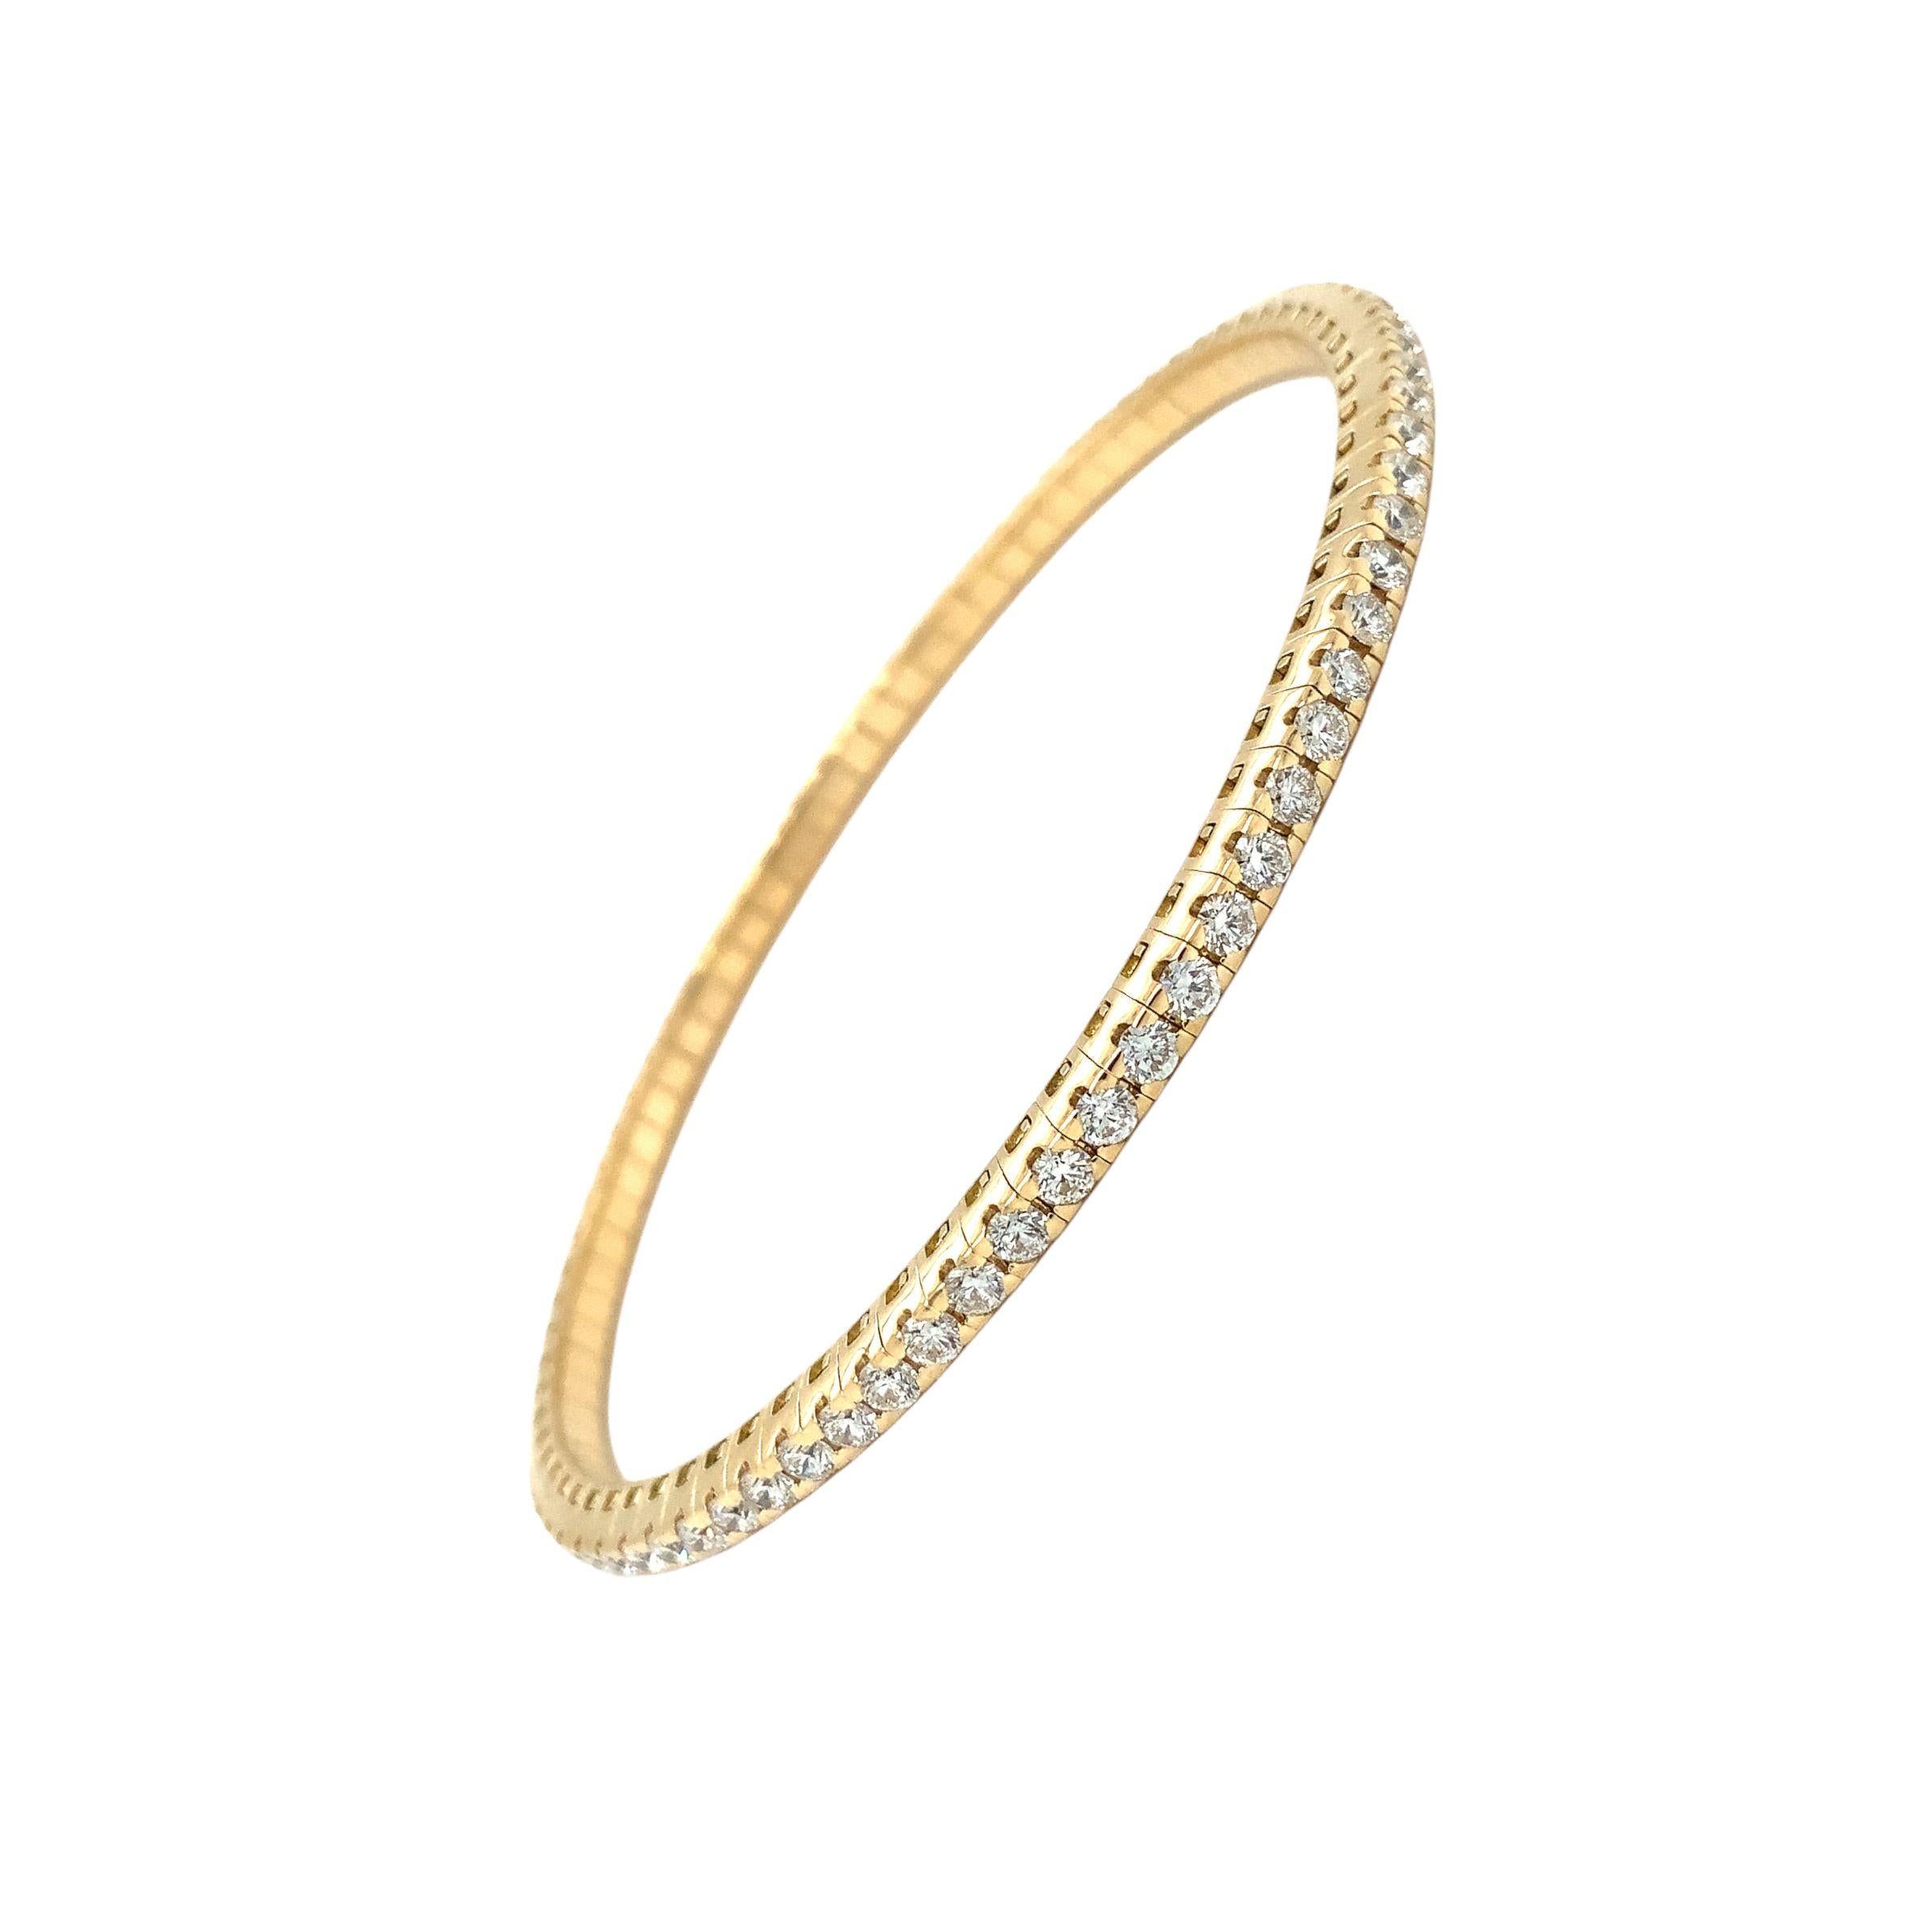 The A. Link Collection Classic Stretchy Diamond Bracelet is a captivating piece set in 18K yellow gold. Crafted with excellence, this bracelet holds an impressive 2.61 carats of Tw round brilliant cut diamonds with F color and near-flawless VS